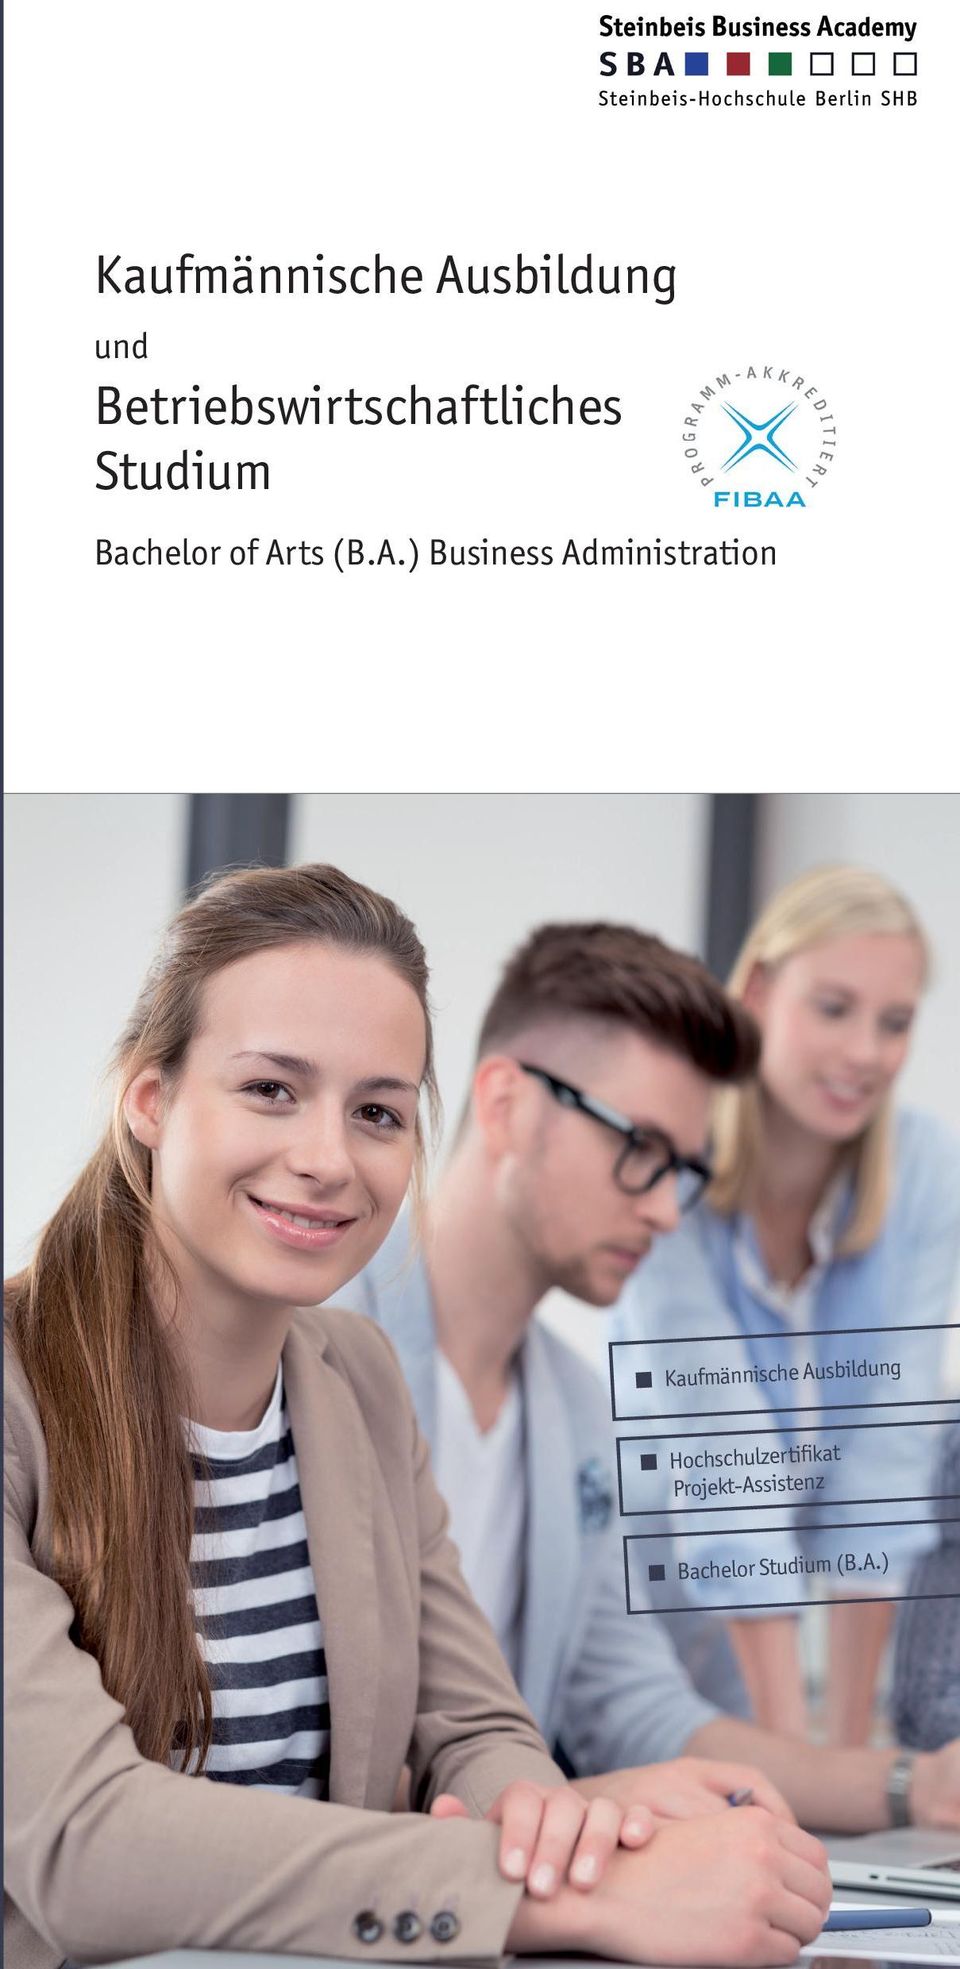 Arts (B.A.) Business Administration